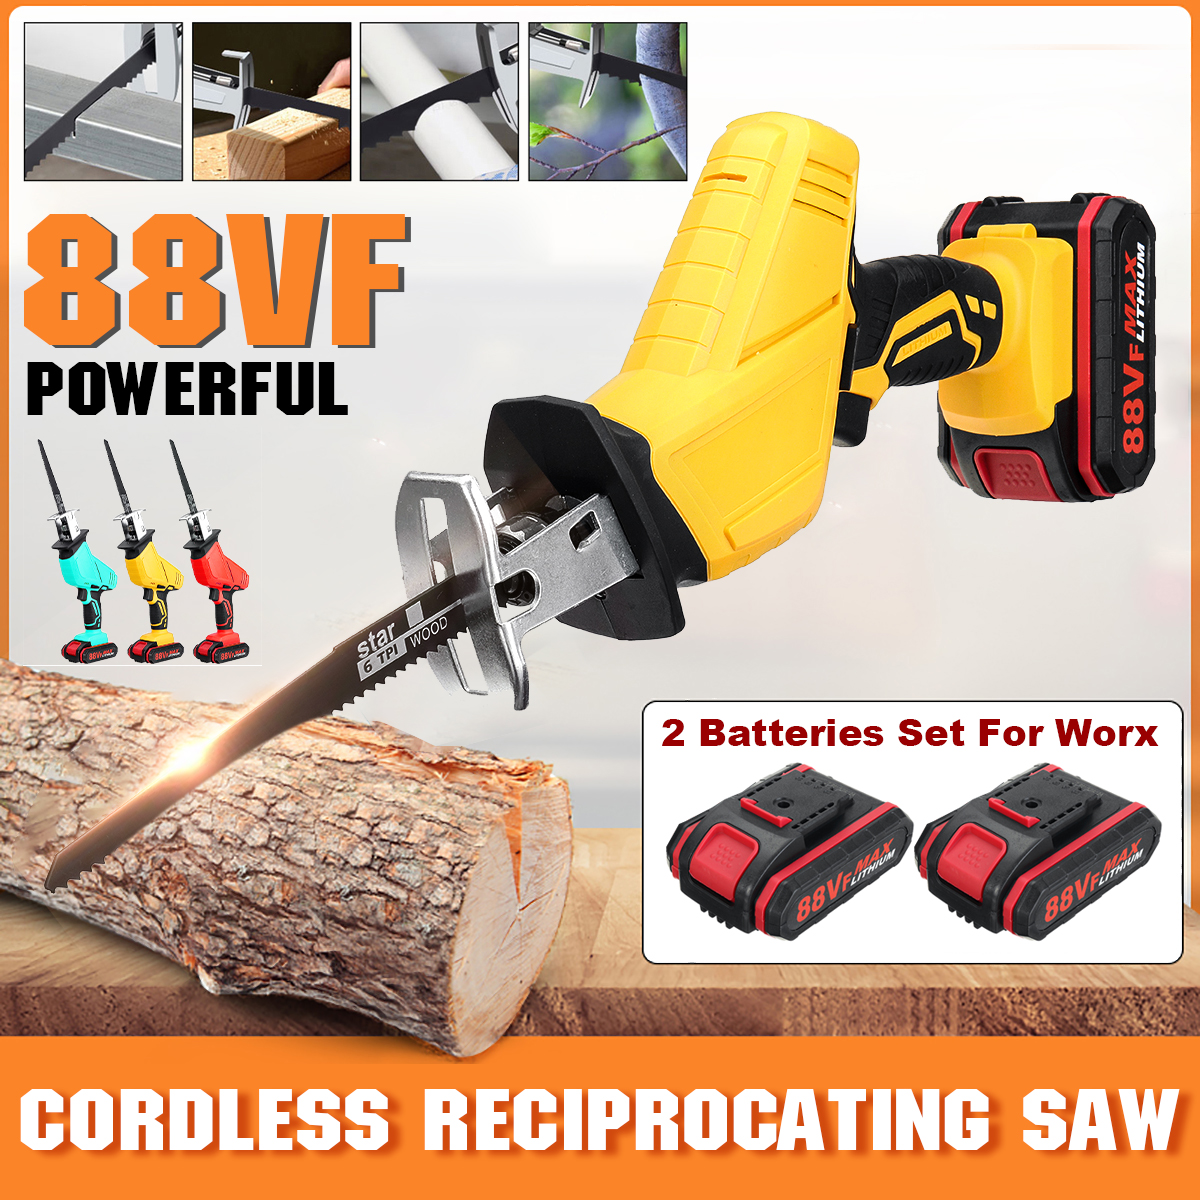 88VF-Cordless-Electric-Reciprocating-Saw-W-4-Blades--1or2-Battery-for-Worx-Woodworking-Wood-Cutting--1878507-1